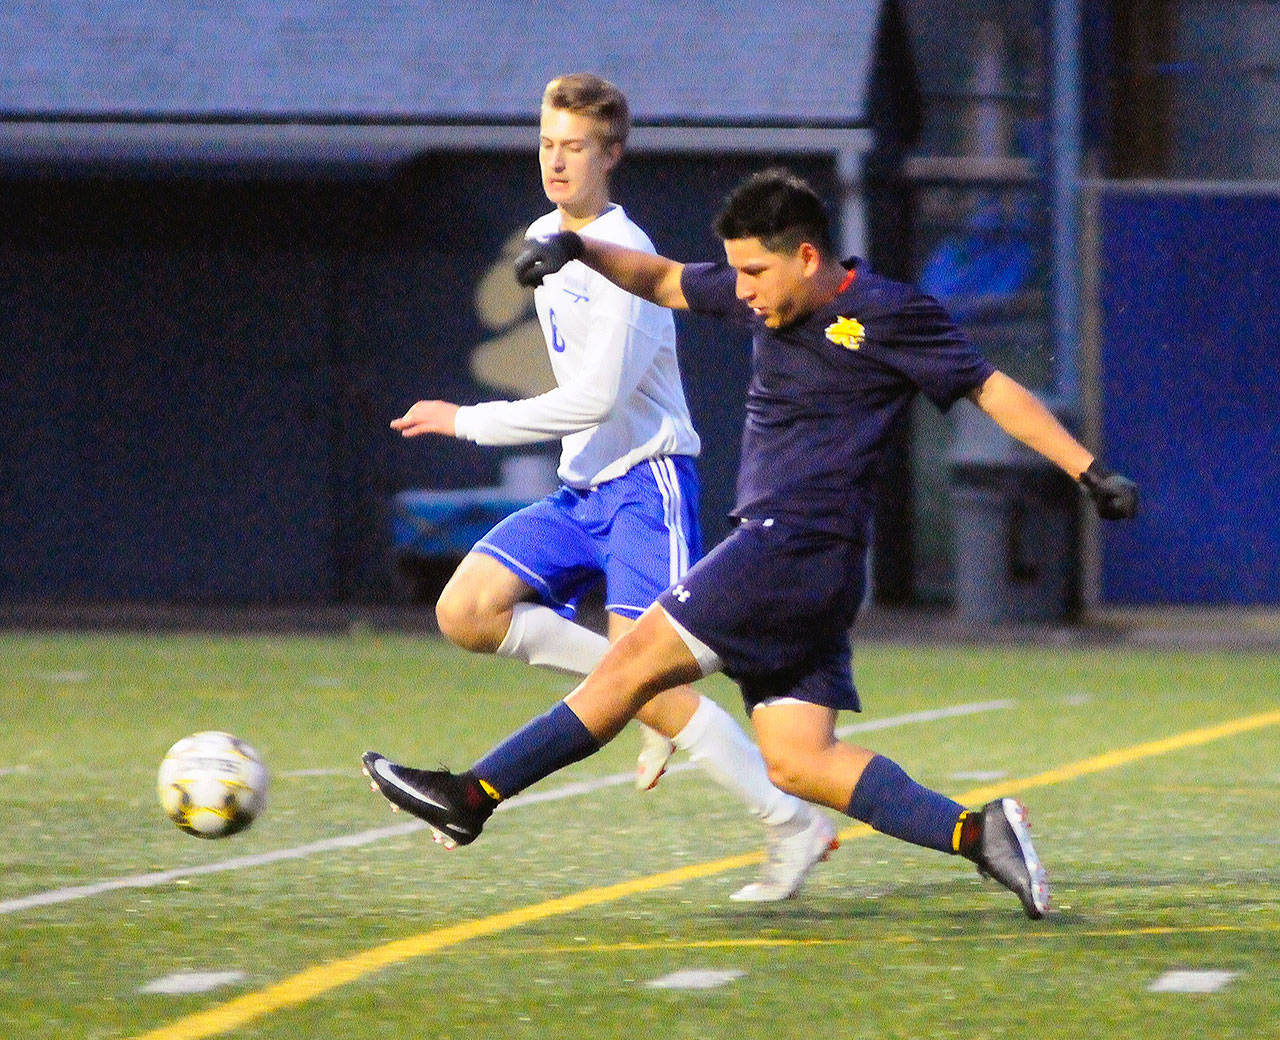 Aberdeen’s Enrique Cuevas takes a shot from just outside the box in second half of a game against Rochester. (Hasani Grayson | Grays Harbor News Group)